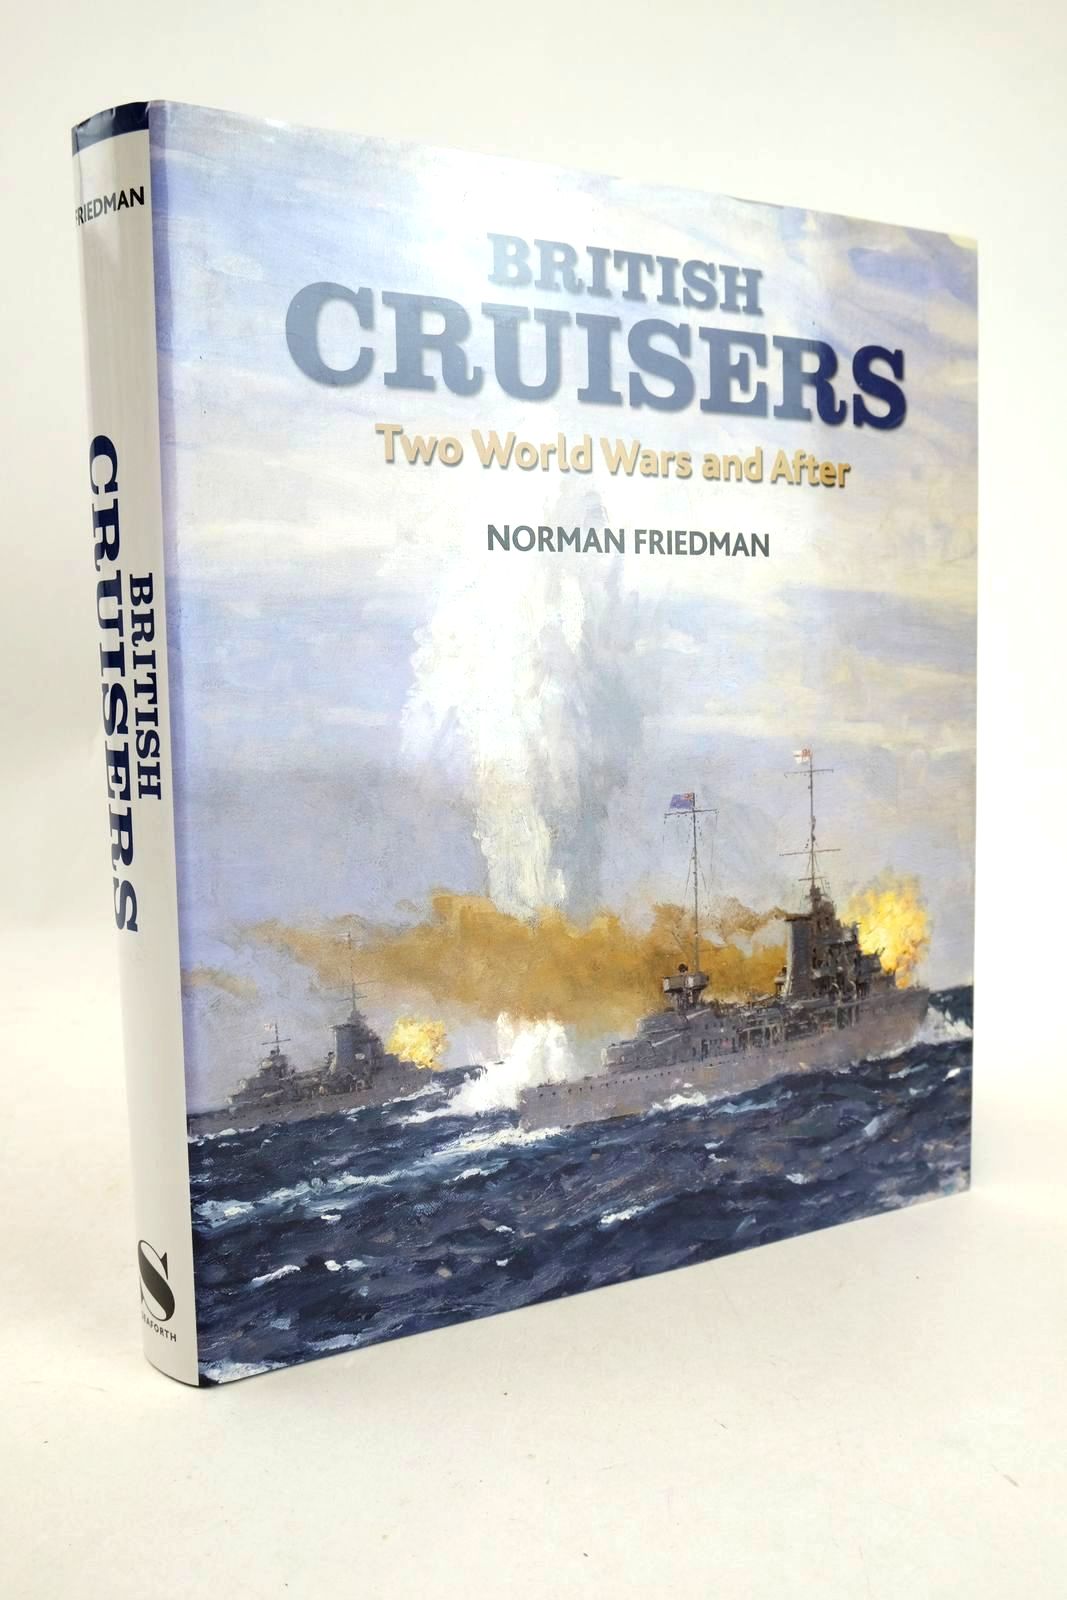 Photo of BRITISH CRUISERS TWO WORLD WARS AND AFTER written by Friedman, Norman illustrated by Baker, A.D. Dominy, John R. Raven, Alan Webb, Paul published by Seaforth Publishing (STOCK CODE: 1327994)  for sale by Stella & Rose's Books